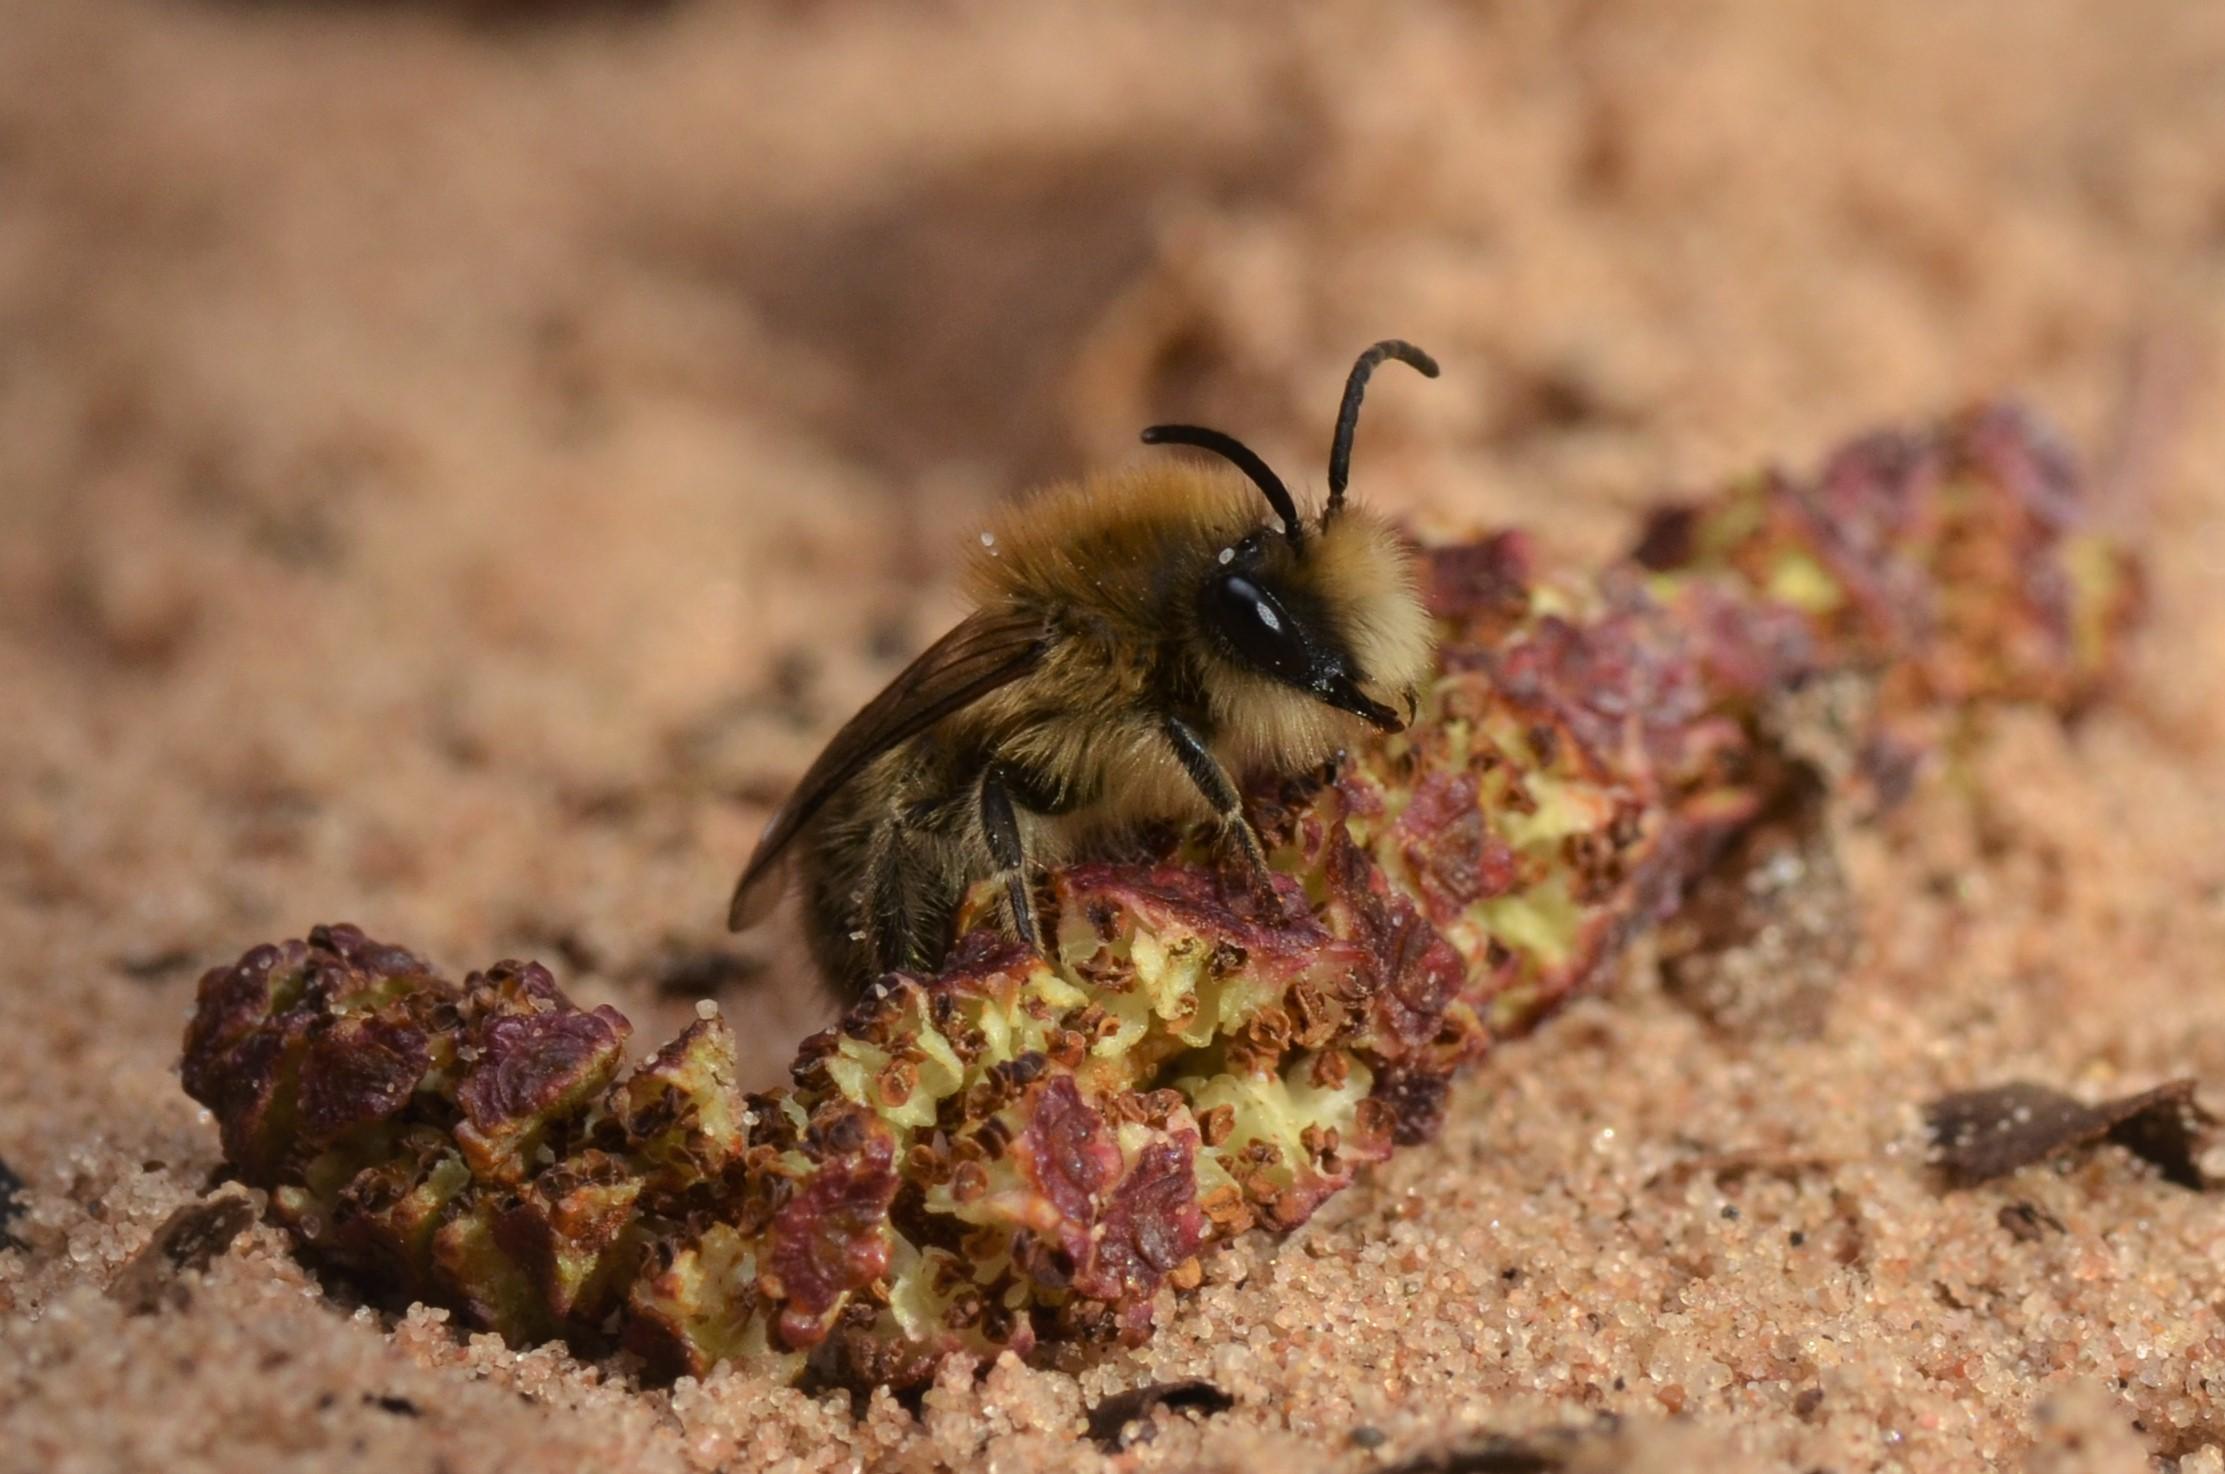 A photograph of the Spring Plasterer Bee